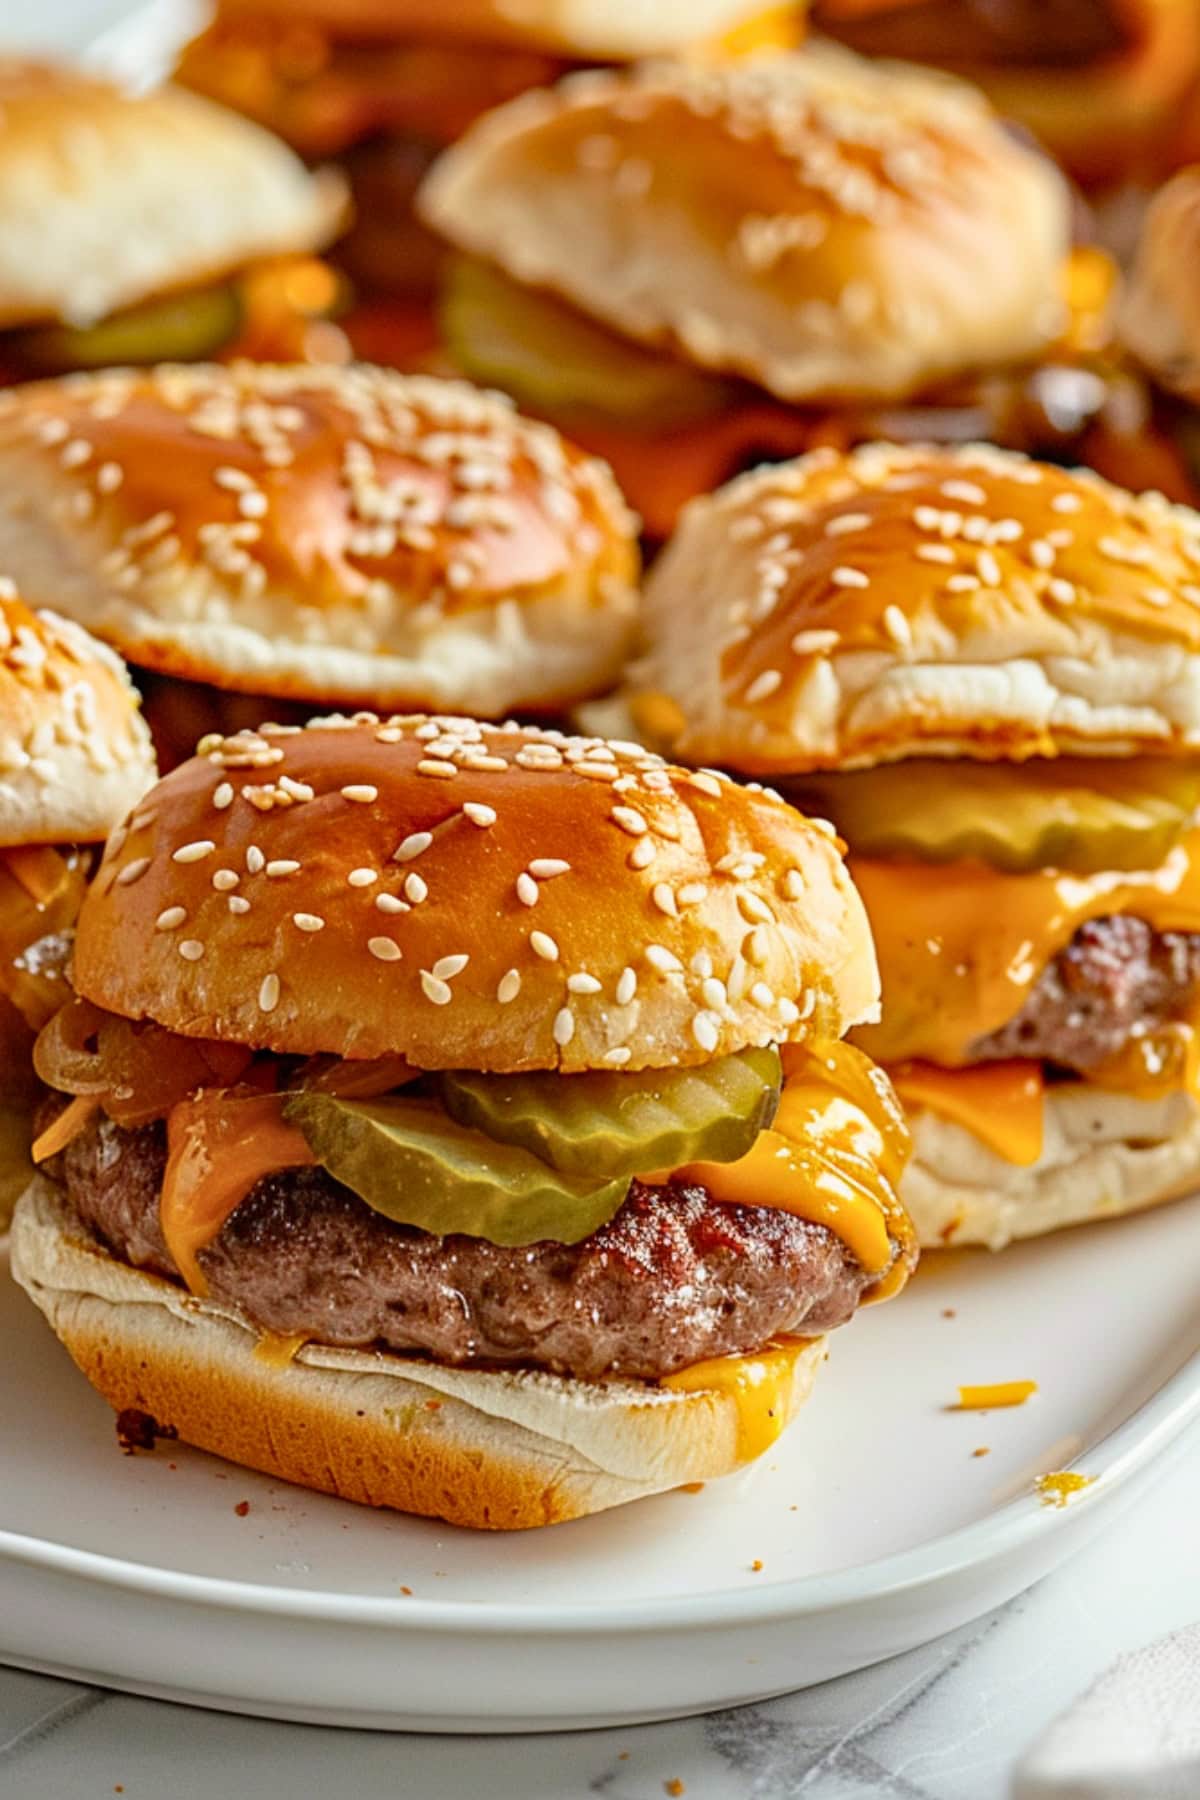 Pulled apart cheeseburger slides arranged in a white plate.